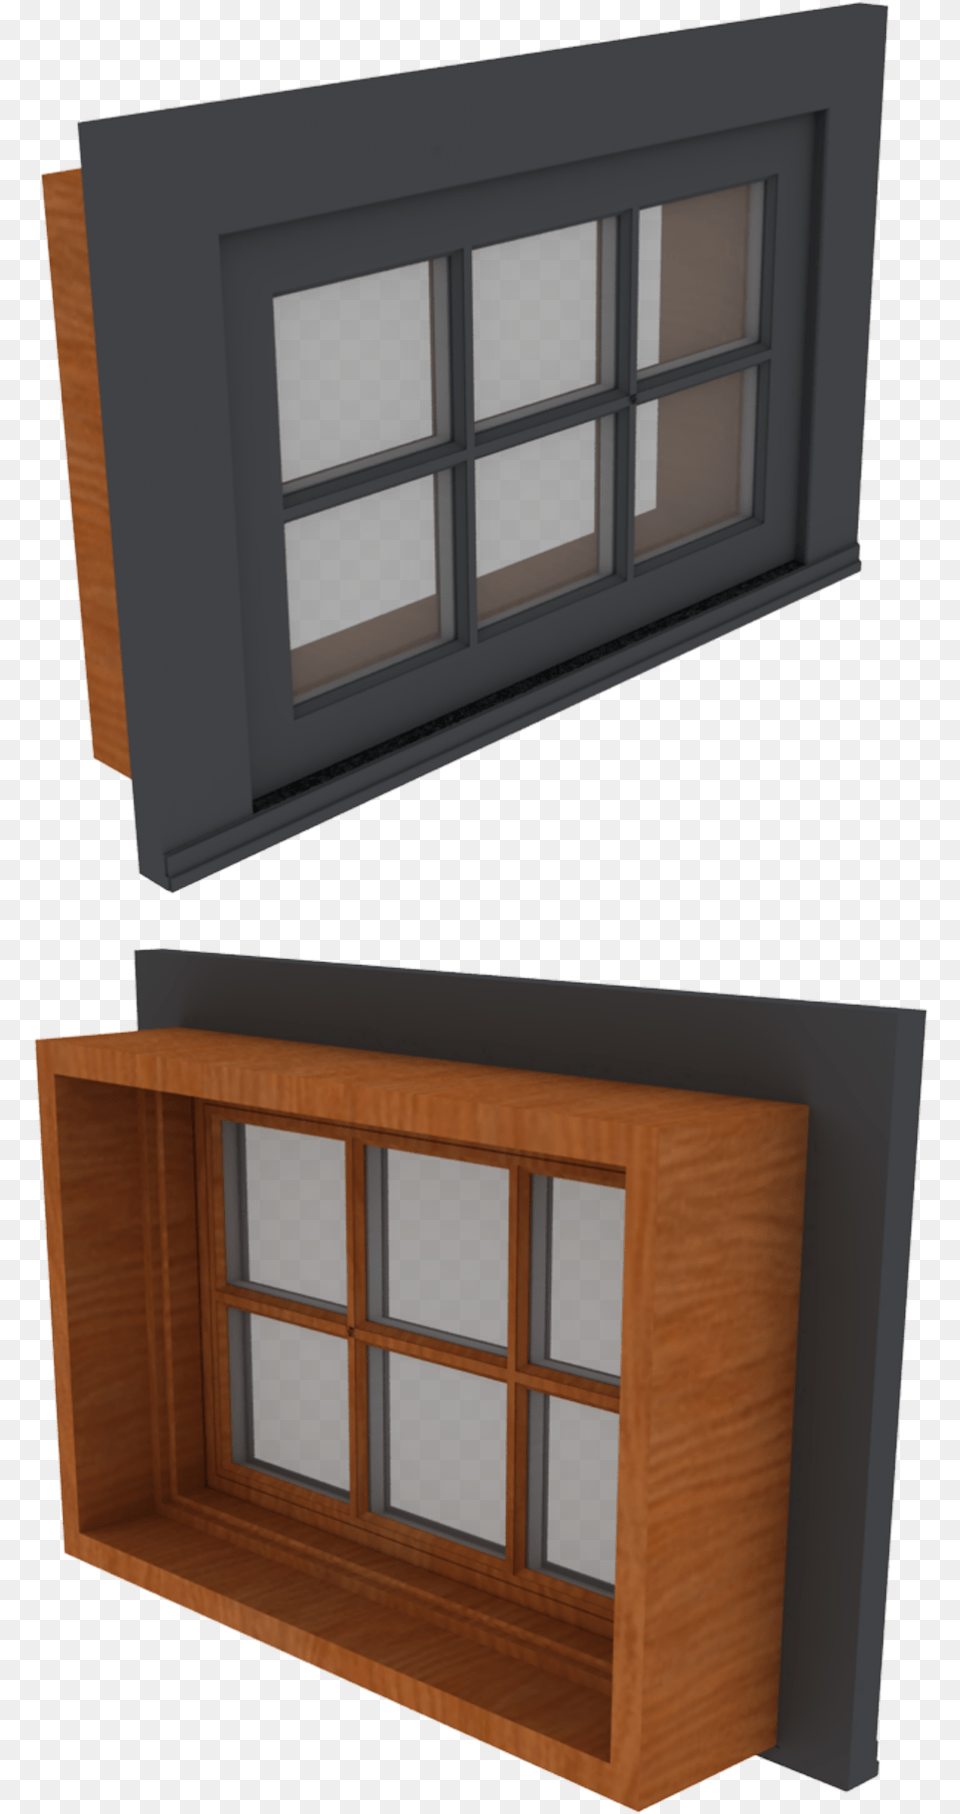 Window Awning 1wx1h3d Viewclass Mw 100 Mh 100 Pol Daylighting, Cabinet, Furniture, Sideboard, Closet Free Transparent Png